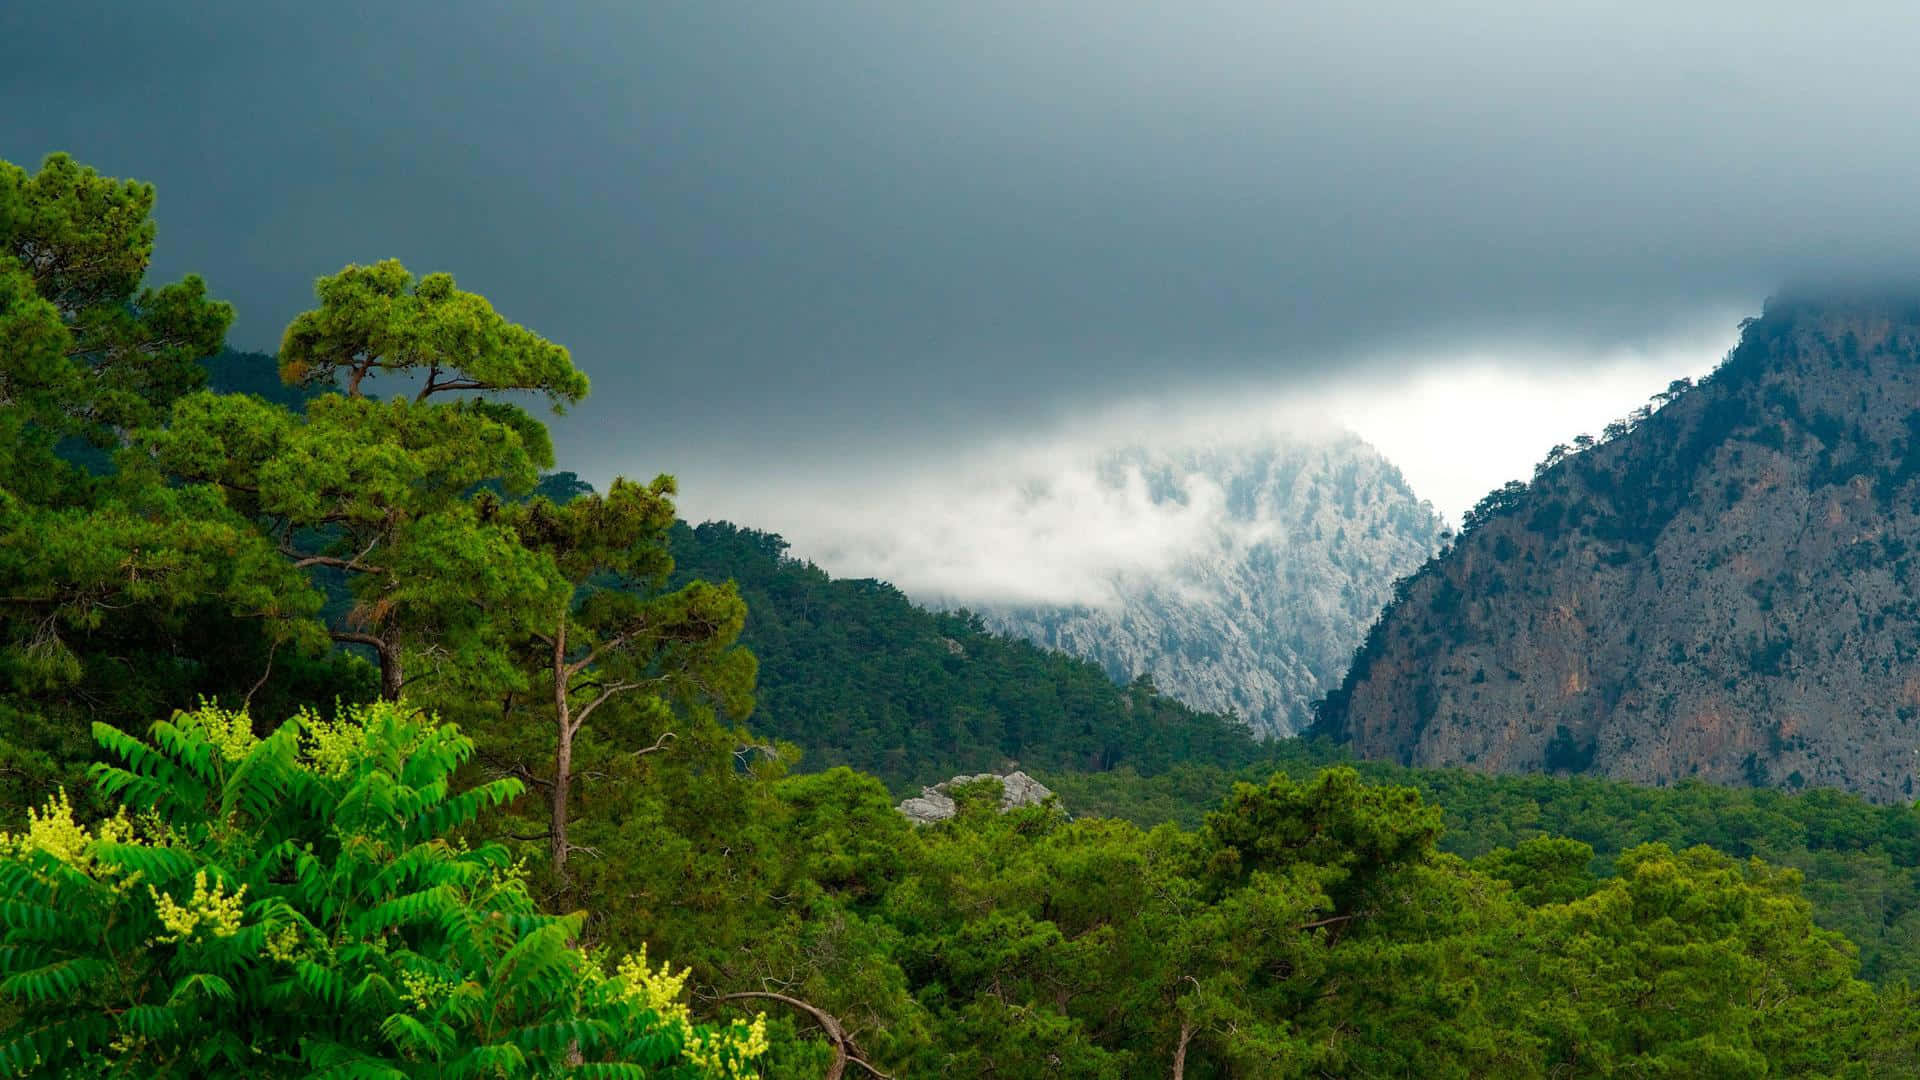 a mountain with trees and a cloudy sky